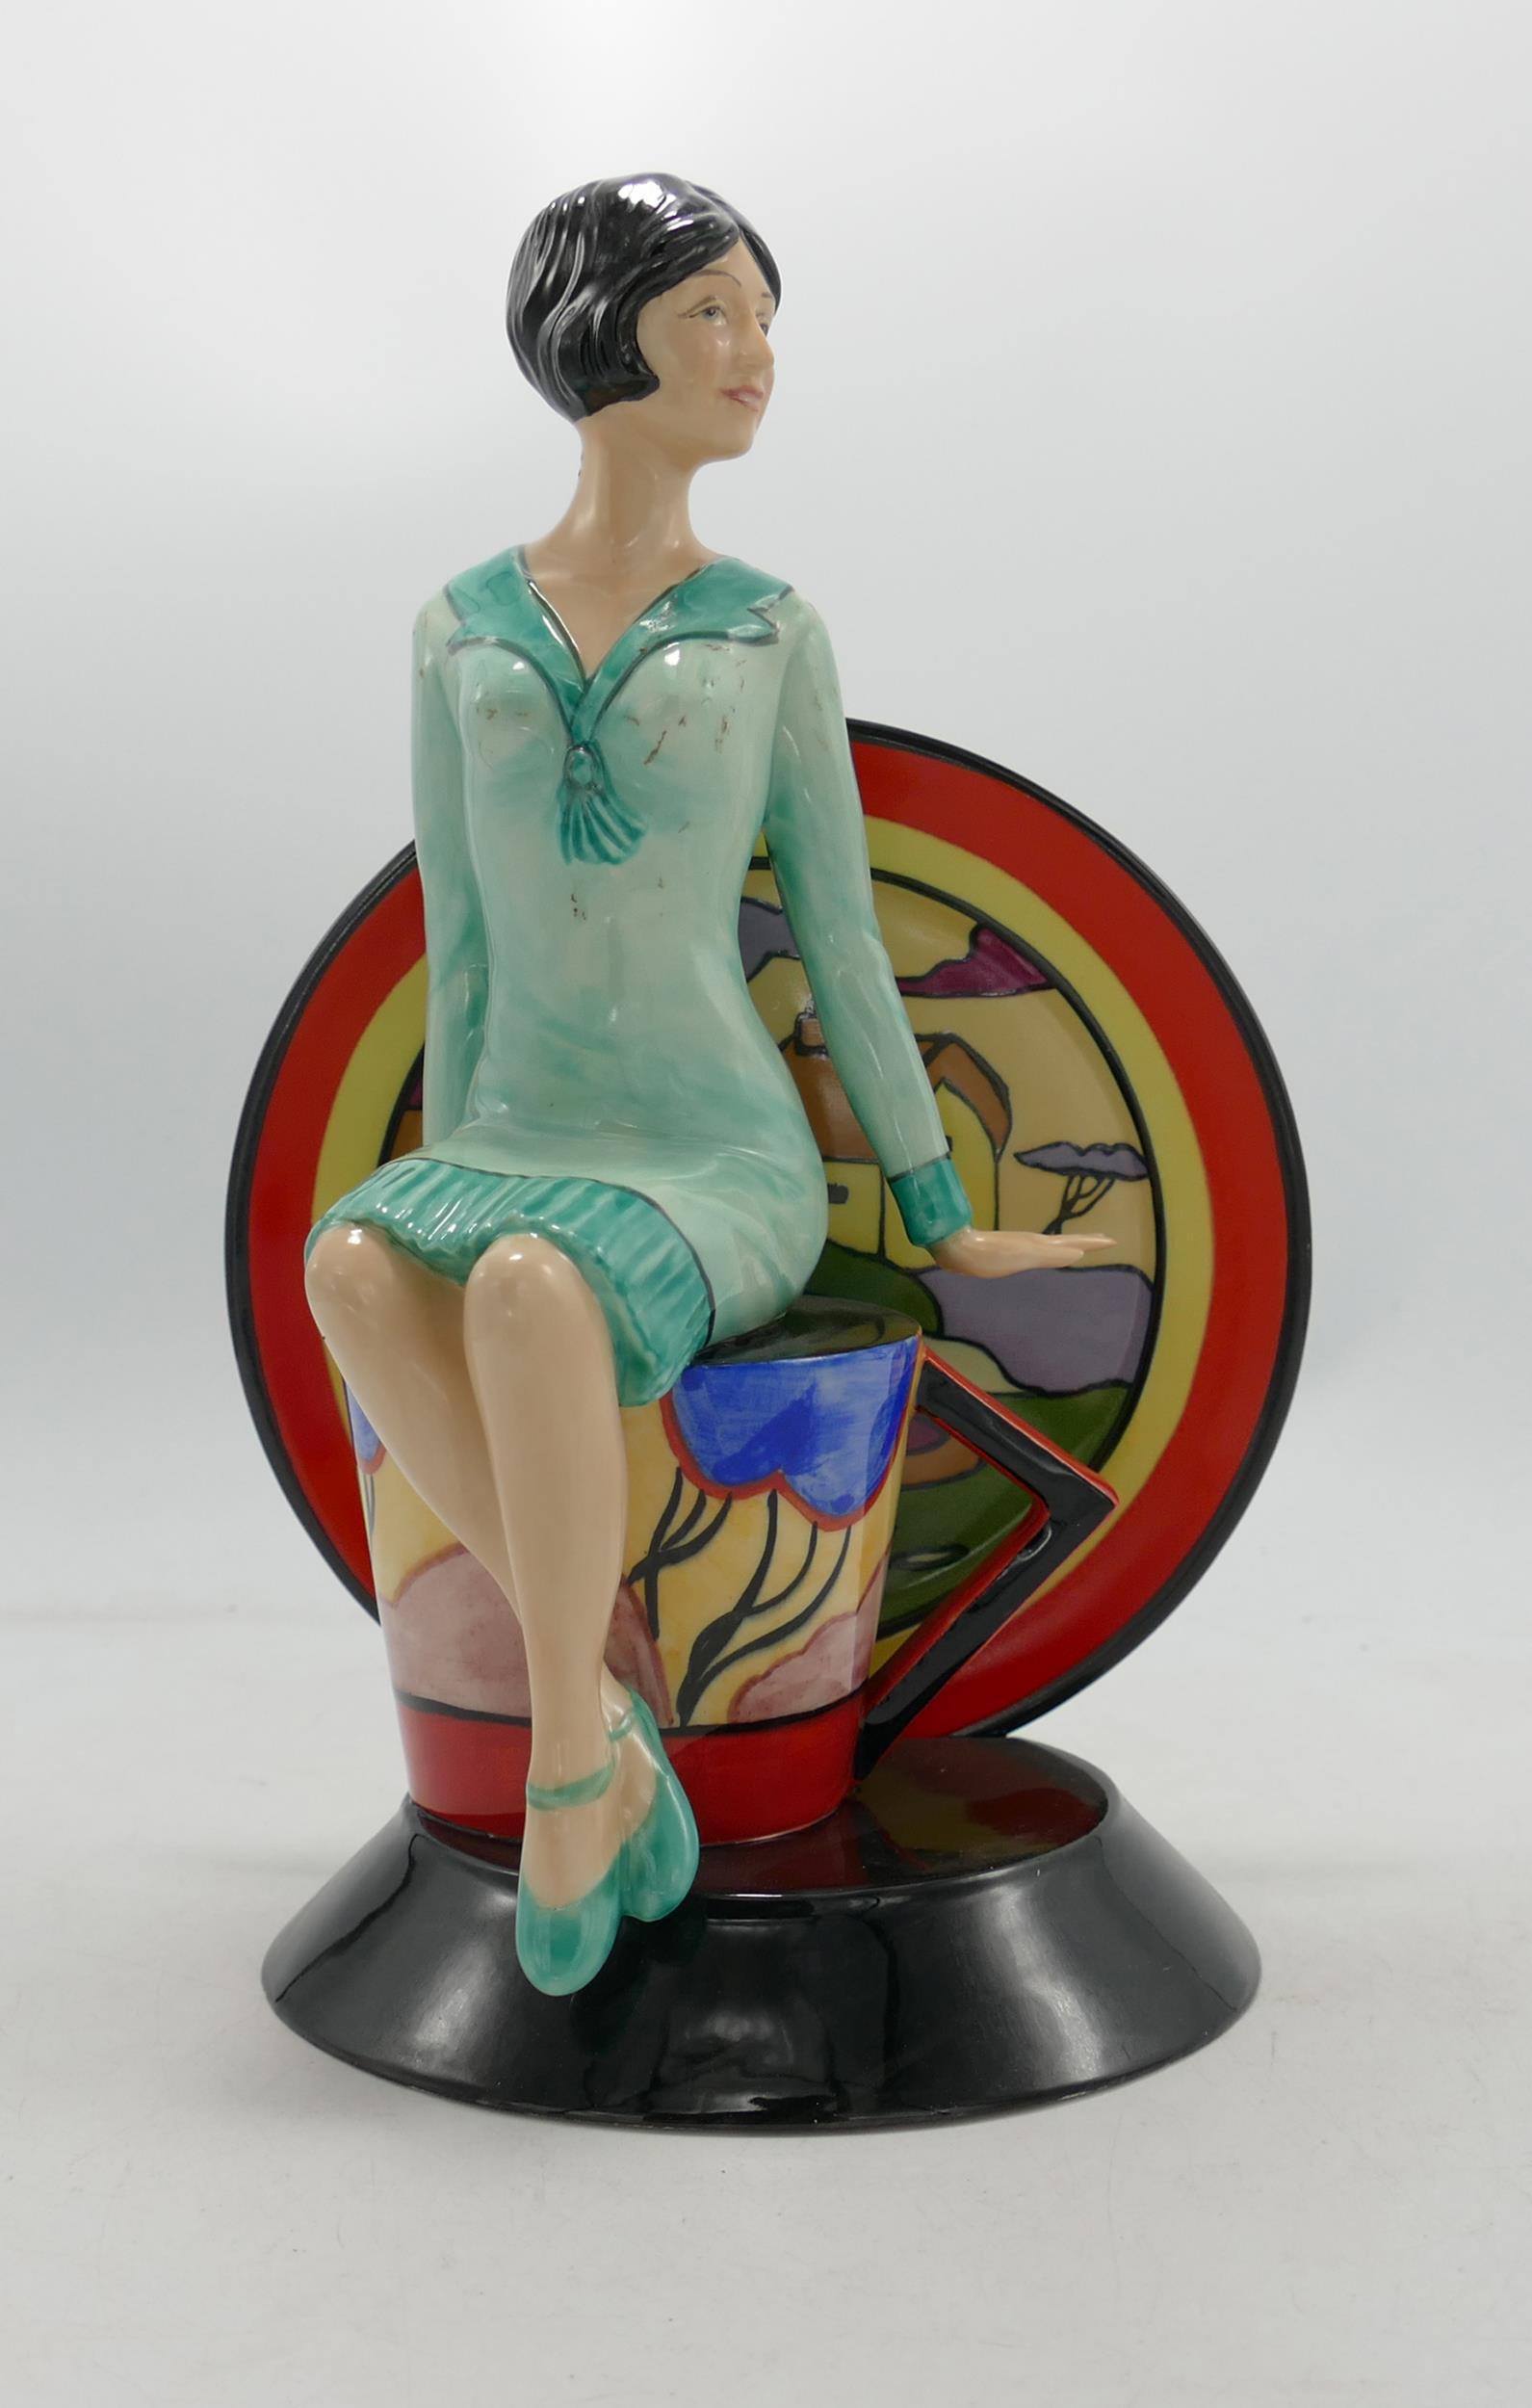 Kevin Francis / Peggy Davies Figure Young Clarice Cliff, limited Edition of 900